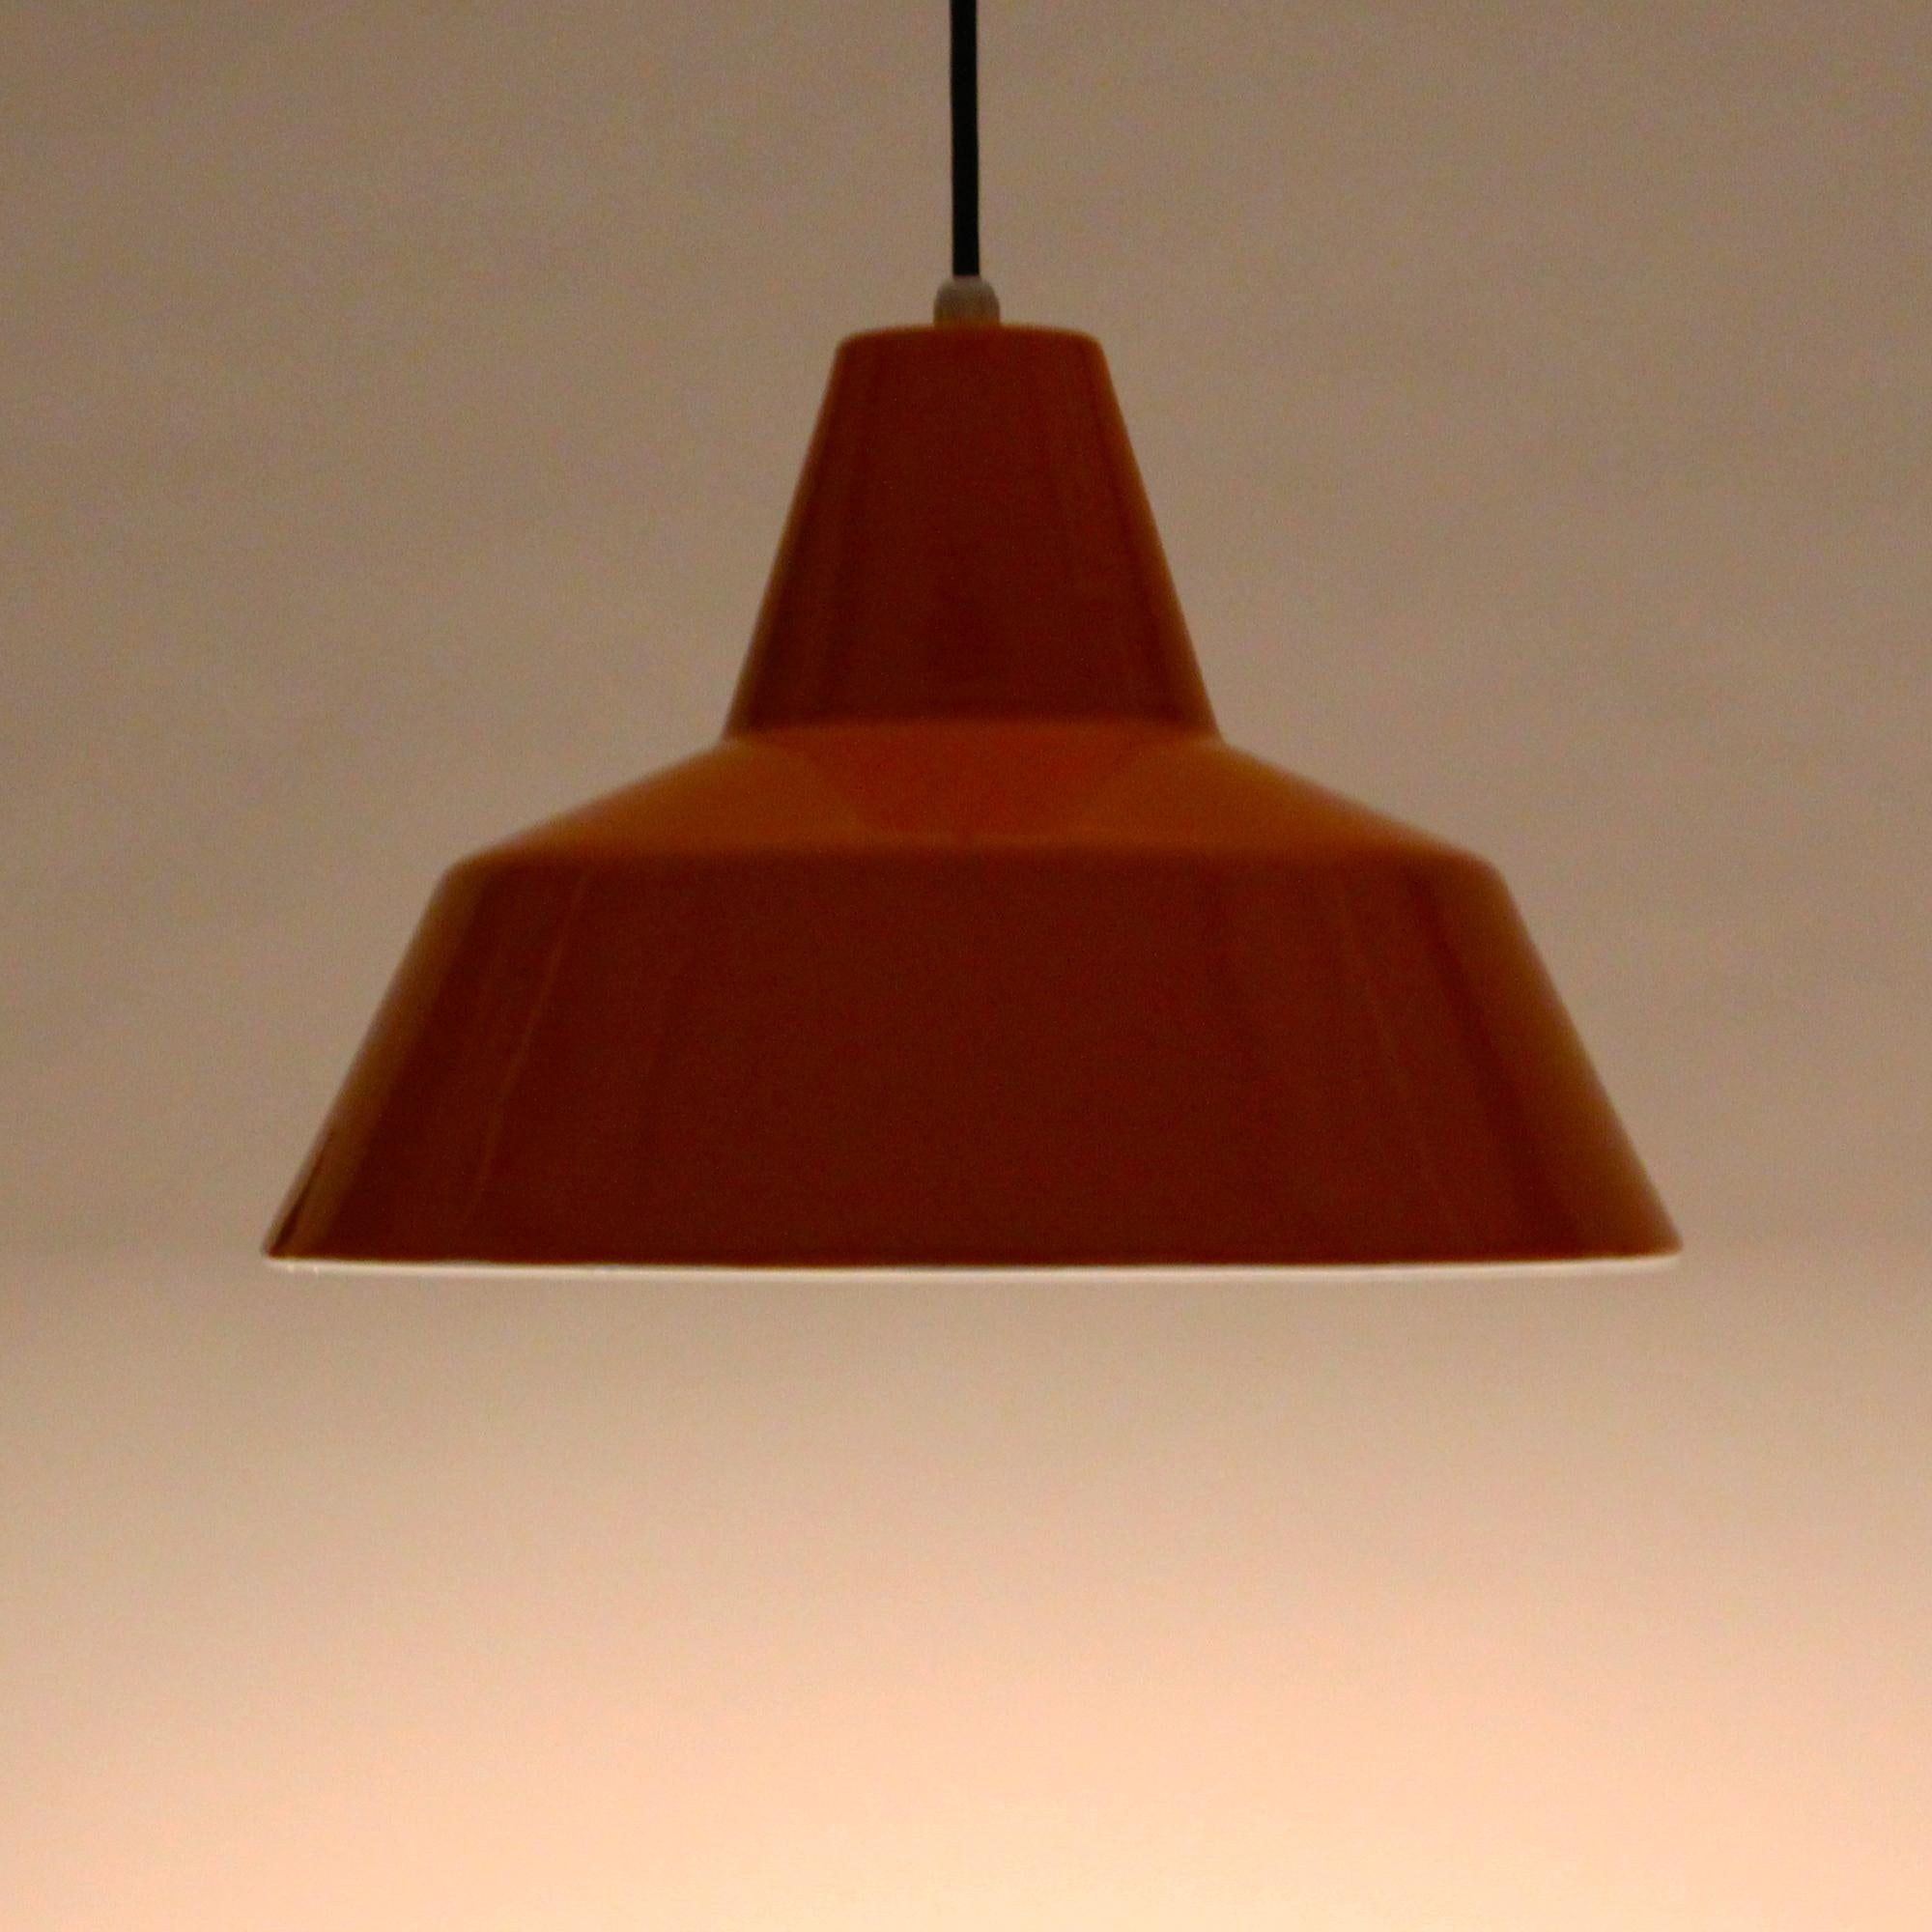 Enamel Pendant, Classic midcentury industrial workshop light produced by Louis Poulsen in the 1960s and in excellent vintage condition.

A large metal pendant with bright orange enameled outer and bright white enameled inner. The white inner gives